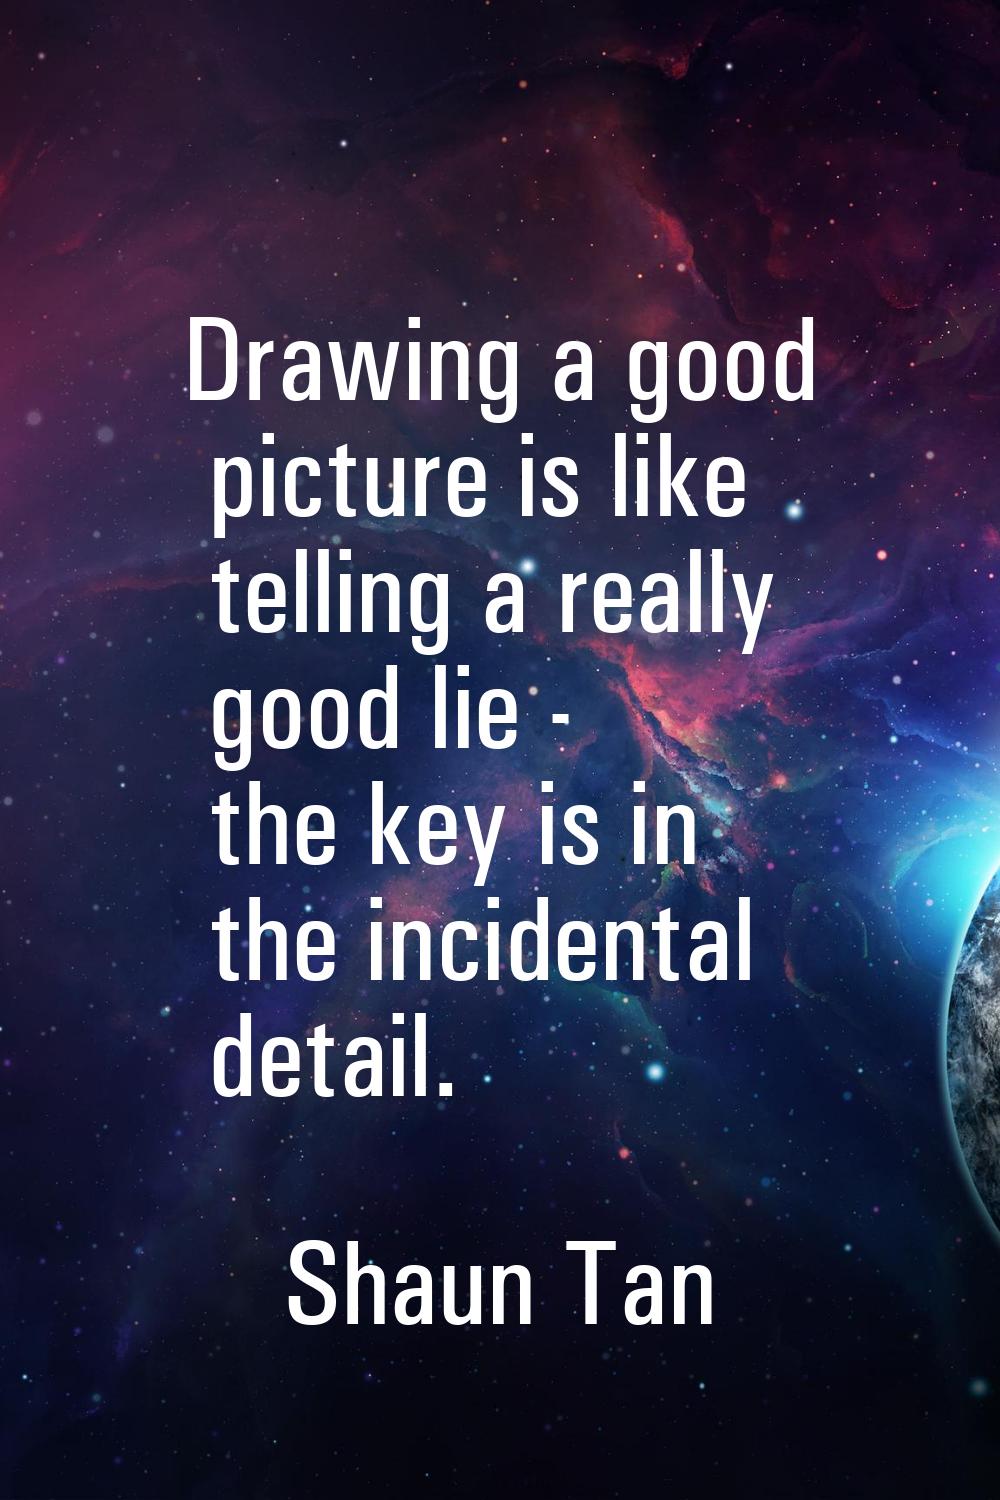 Drawing a good picture is like telling a really good lie - the key is in the incidental detail.